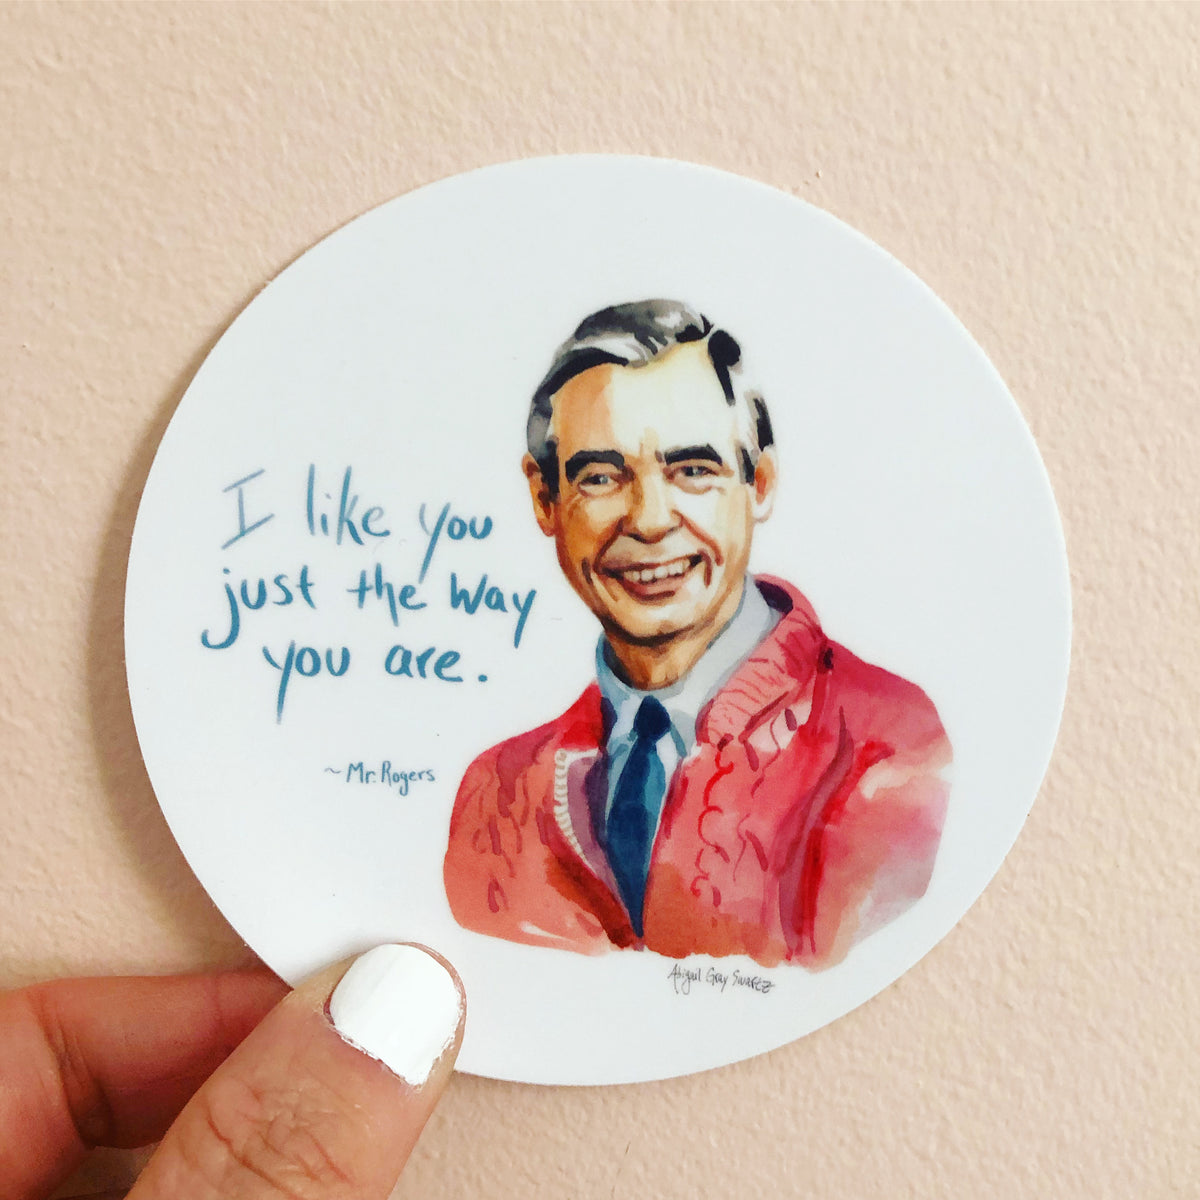 Mr Rogers portrait sticker and quote &quot;I Like you just the way you are&quot; by Abigail Gray Swartz